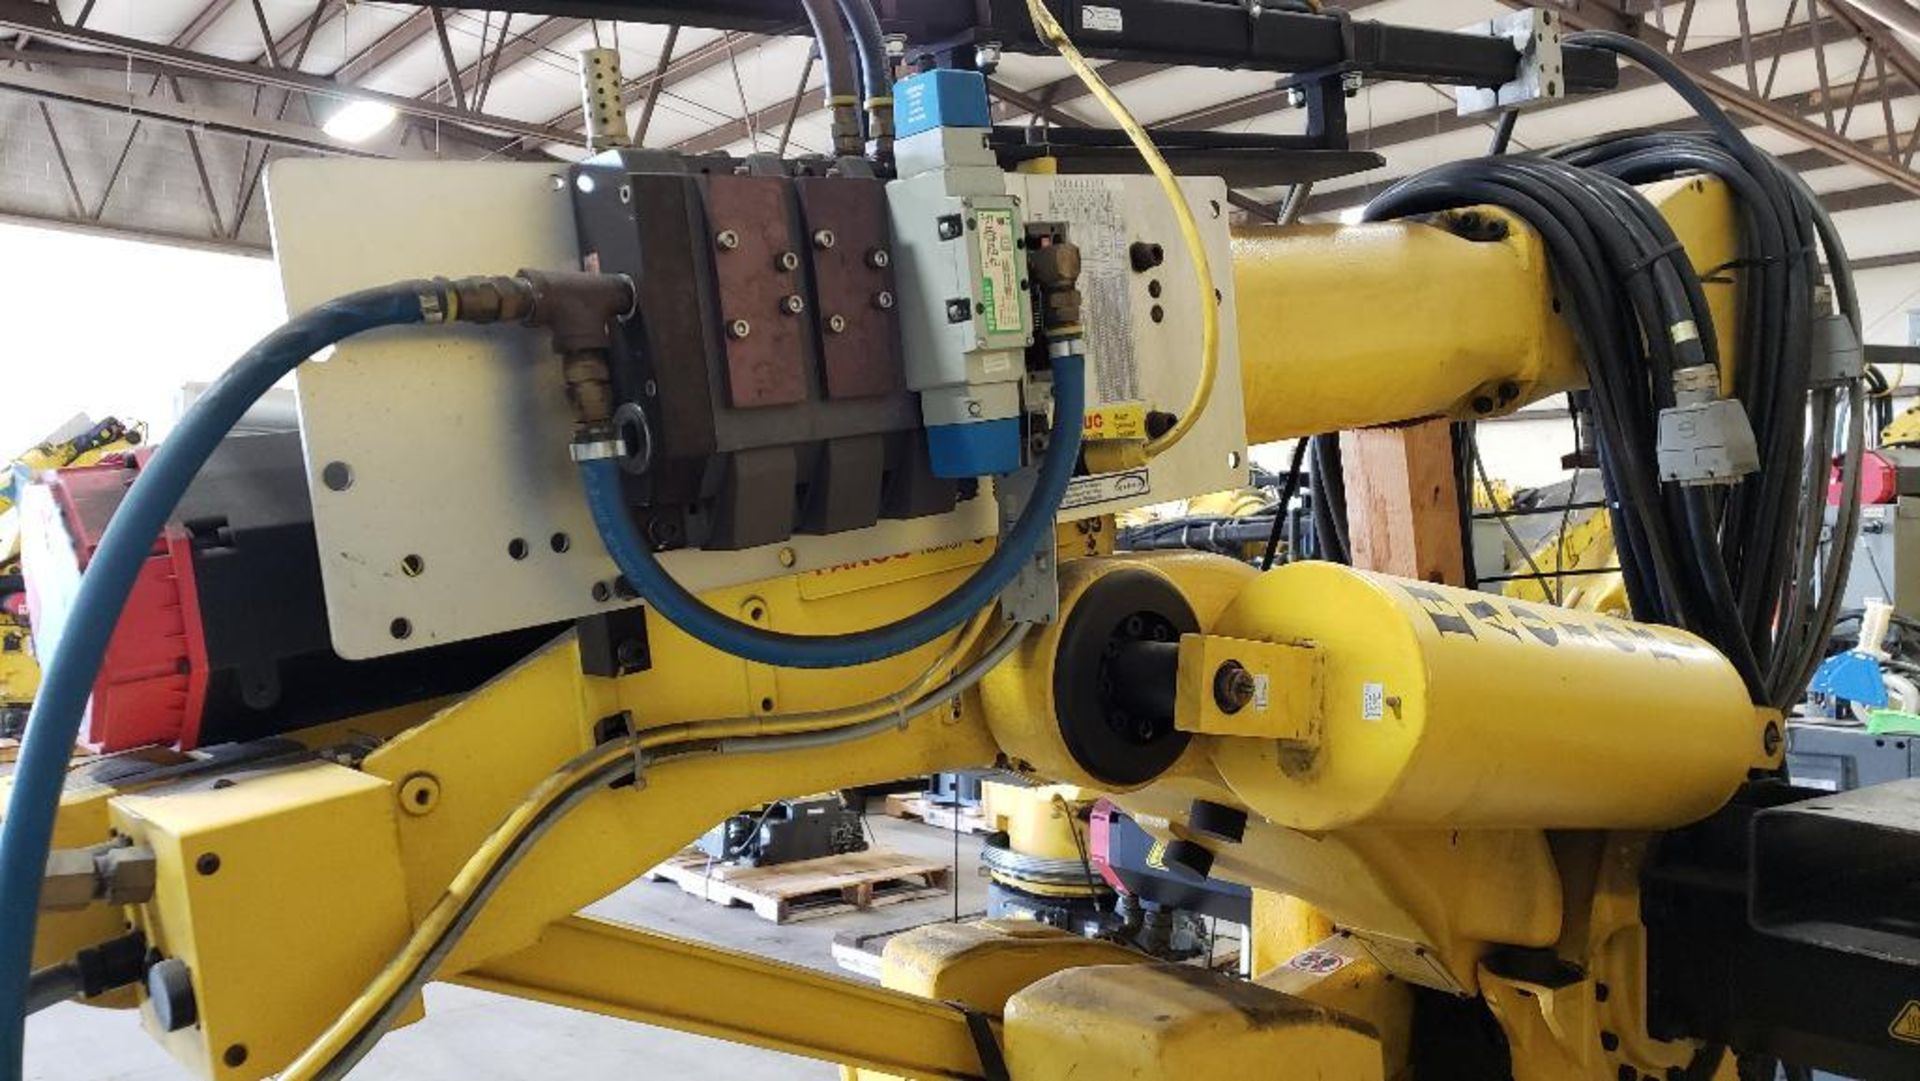 Fanuc S-420iW robot 6-axis arm. - Image 7 of 8